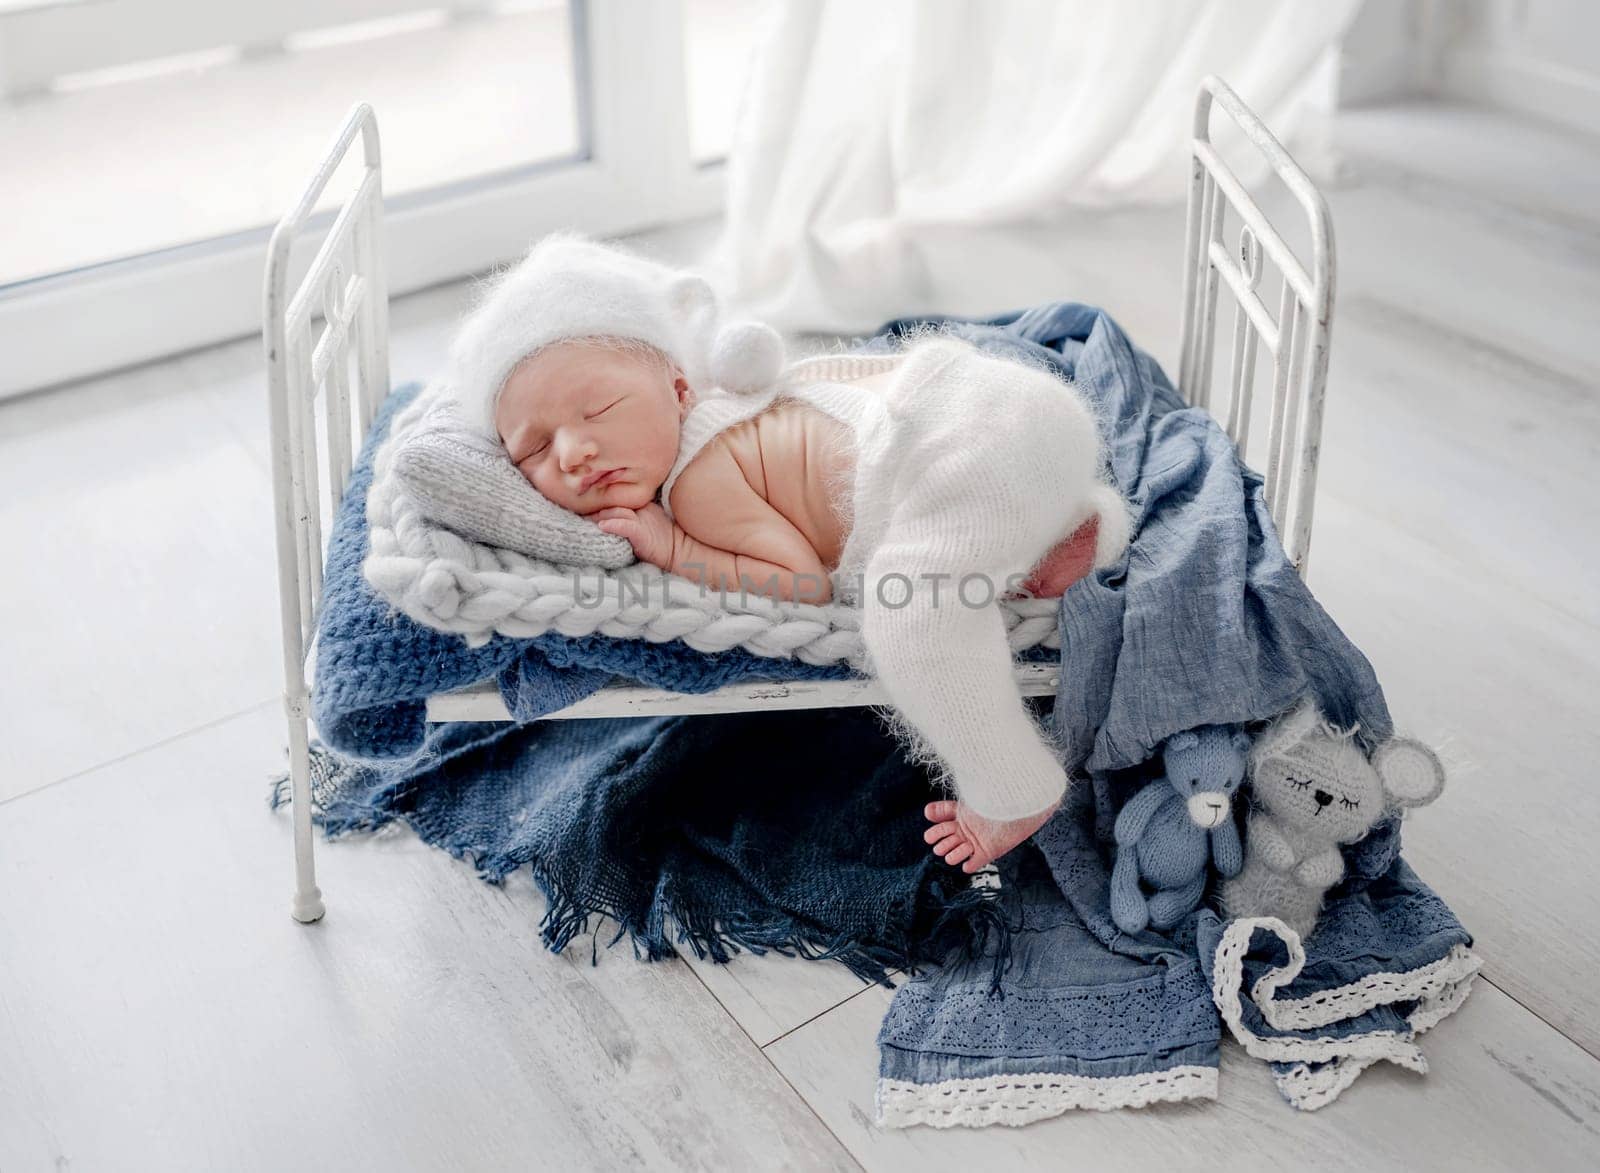 Adorable newborn baby boy sleeping in tiny bed decorated with blankets and knitted toys. Cute infant child kid napping in white warm clothes